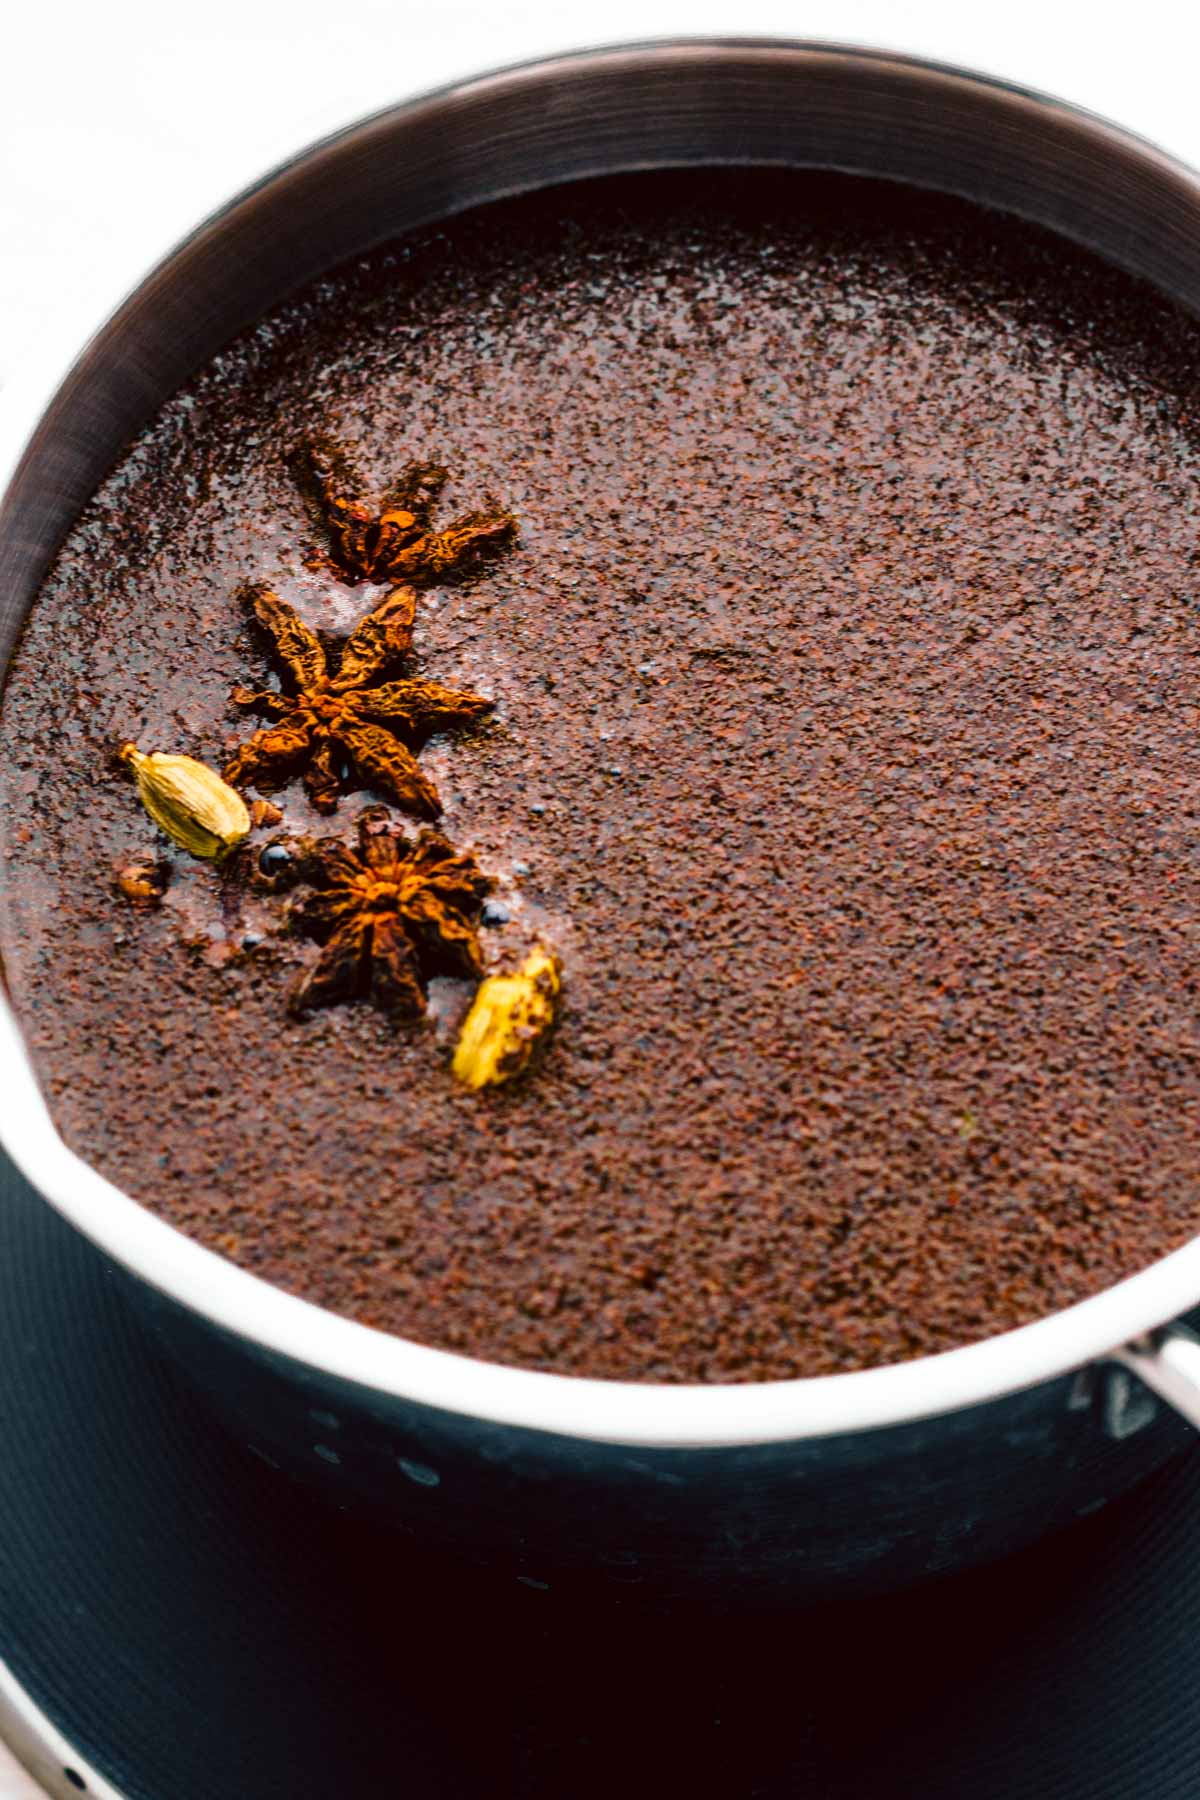 A stainless steel pan with dark brown tea showing black tea, star anise and cinnamon floating on top.